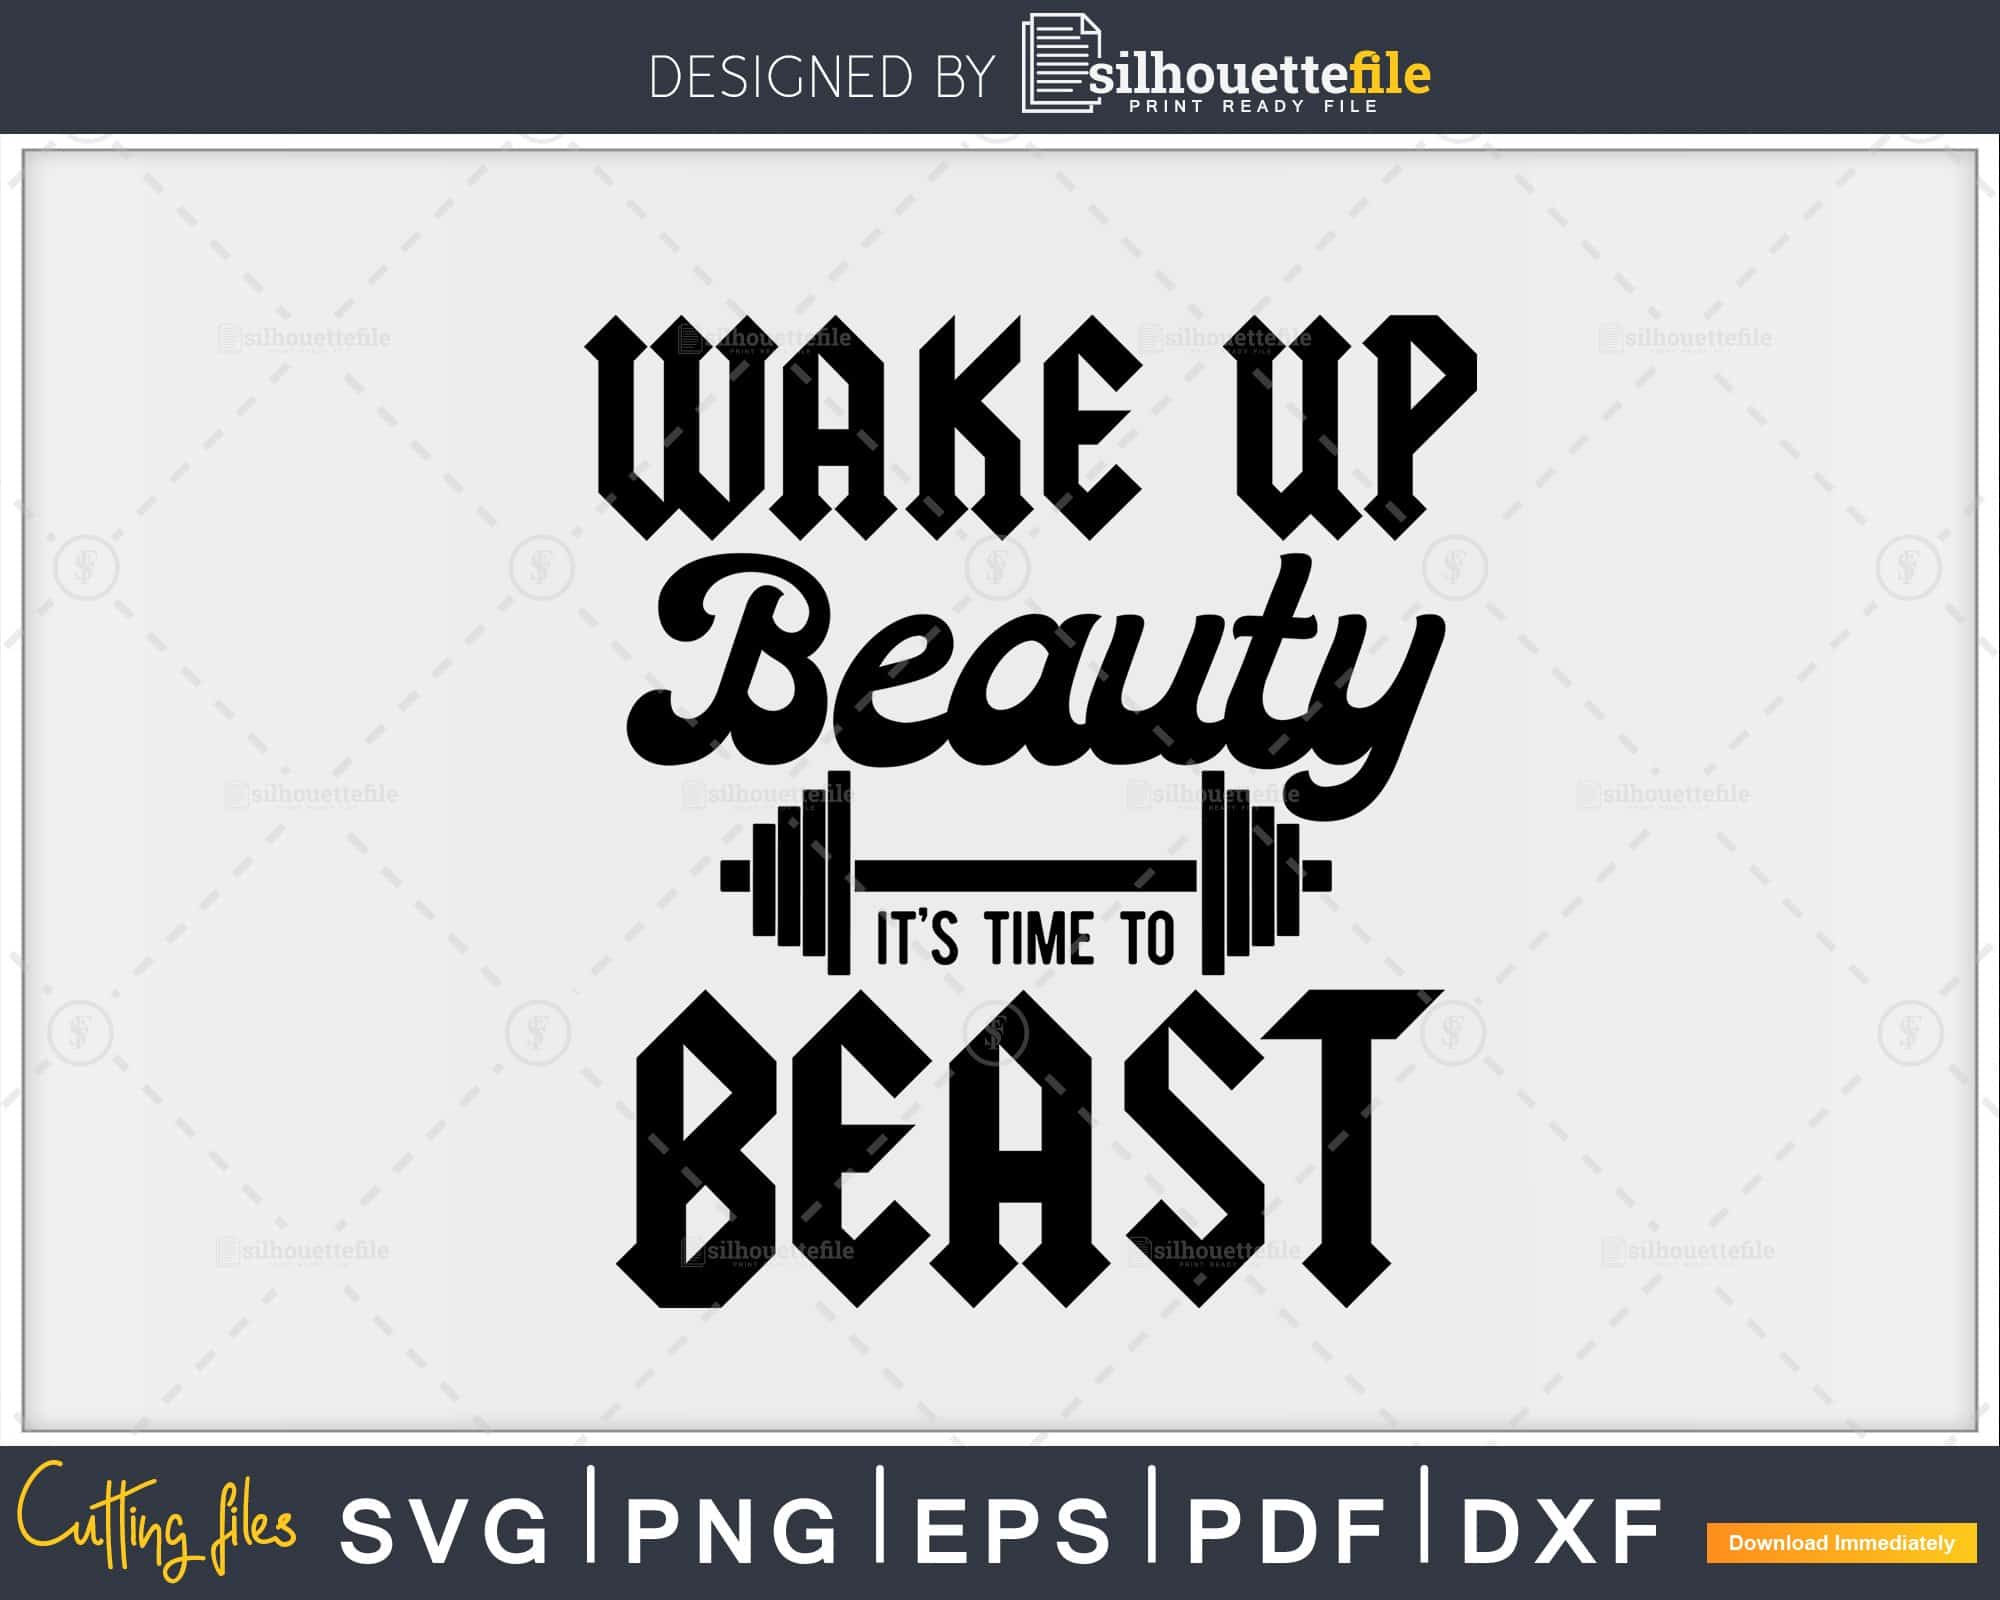 Workout Wake Up Beauty It S Time To Beast Svg Png Digital Silhouettefile